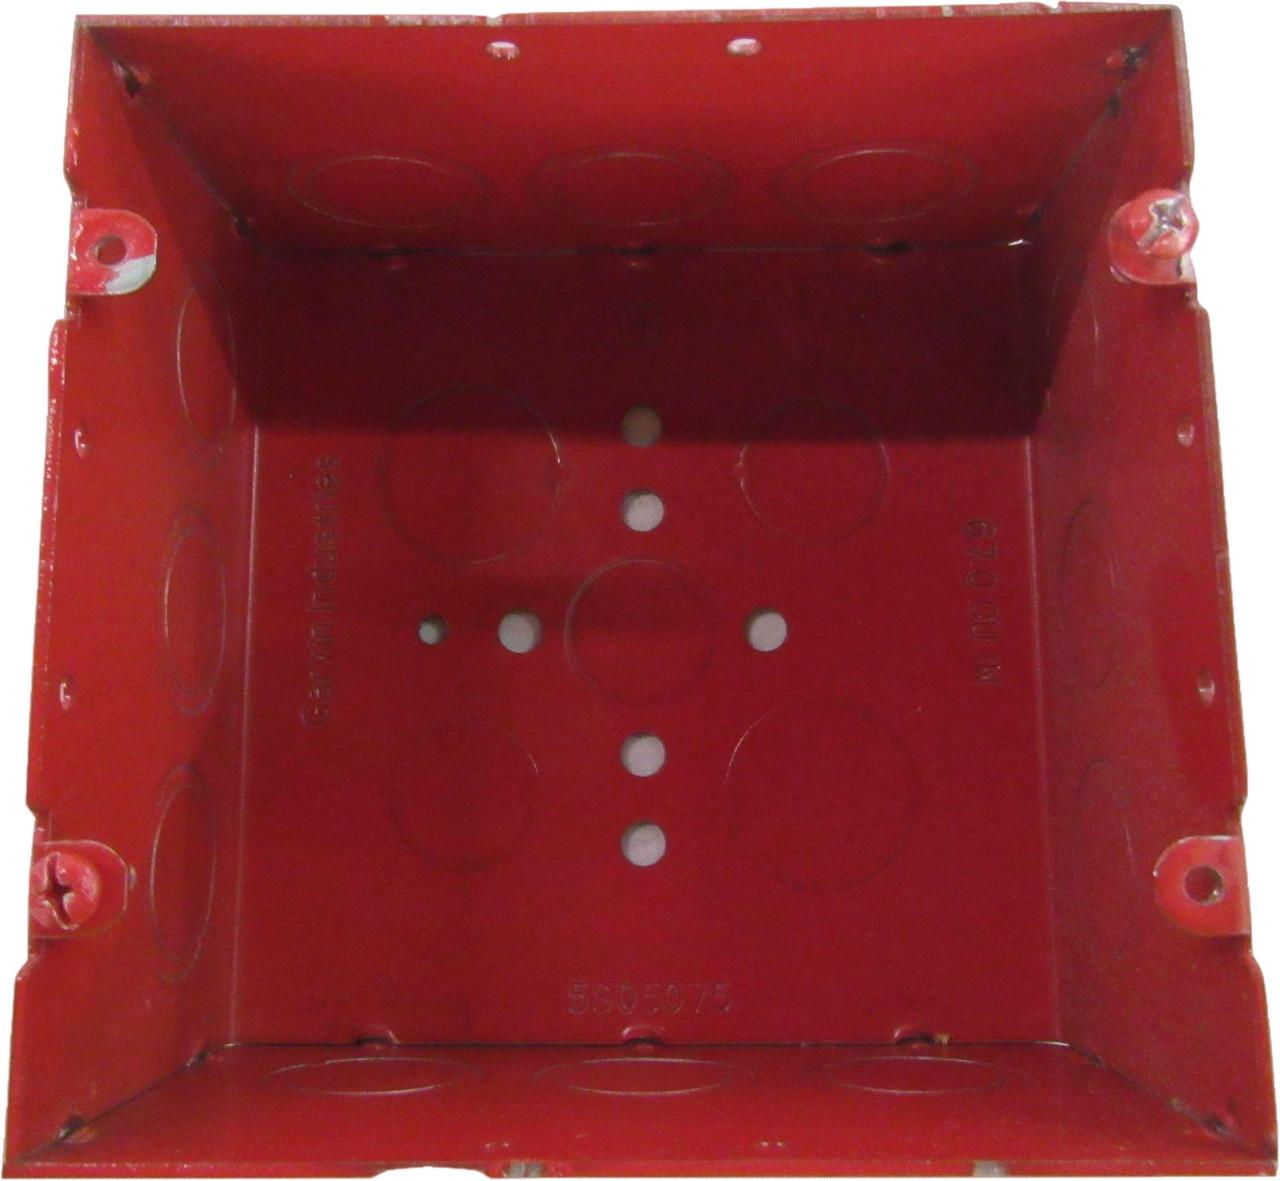 Eaton TP5SQ5075-RED Eaton Crouse-Hinds series outlet box, (3)- 1/2", (2) 3/4", 5", Red painted, Conduit (no clamps), Welded, 2-7/8", Galvanized steel, (12)  1/2" + 3/4" C, 67.0 cubic inch capacity